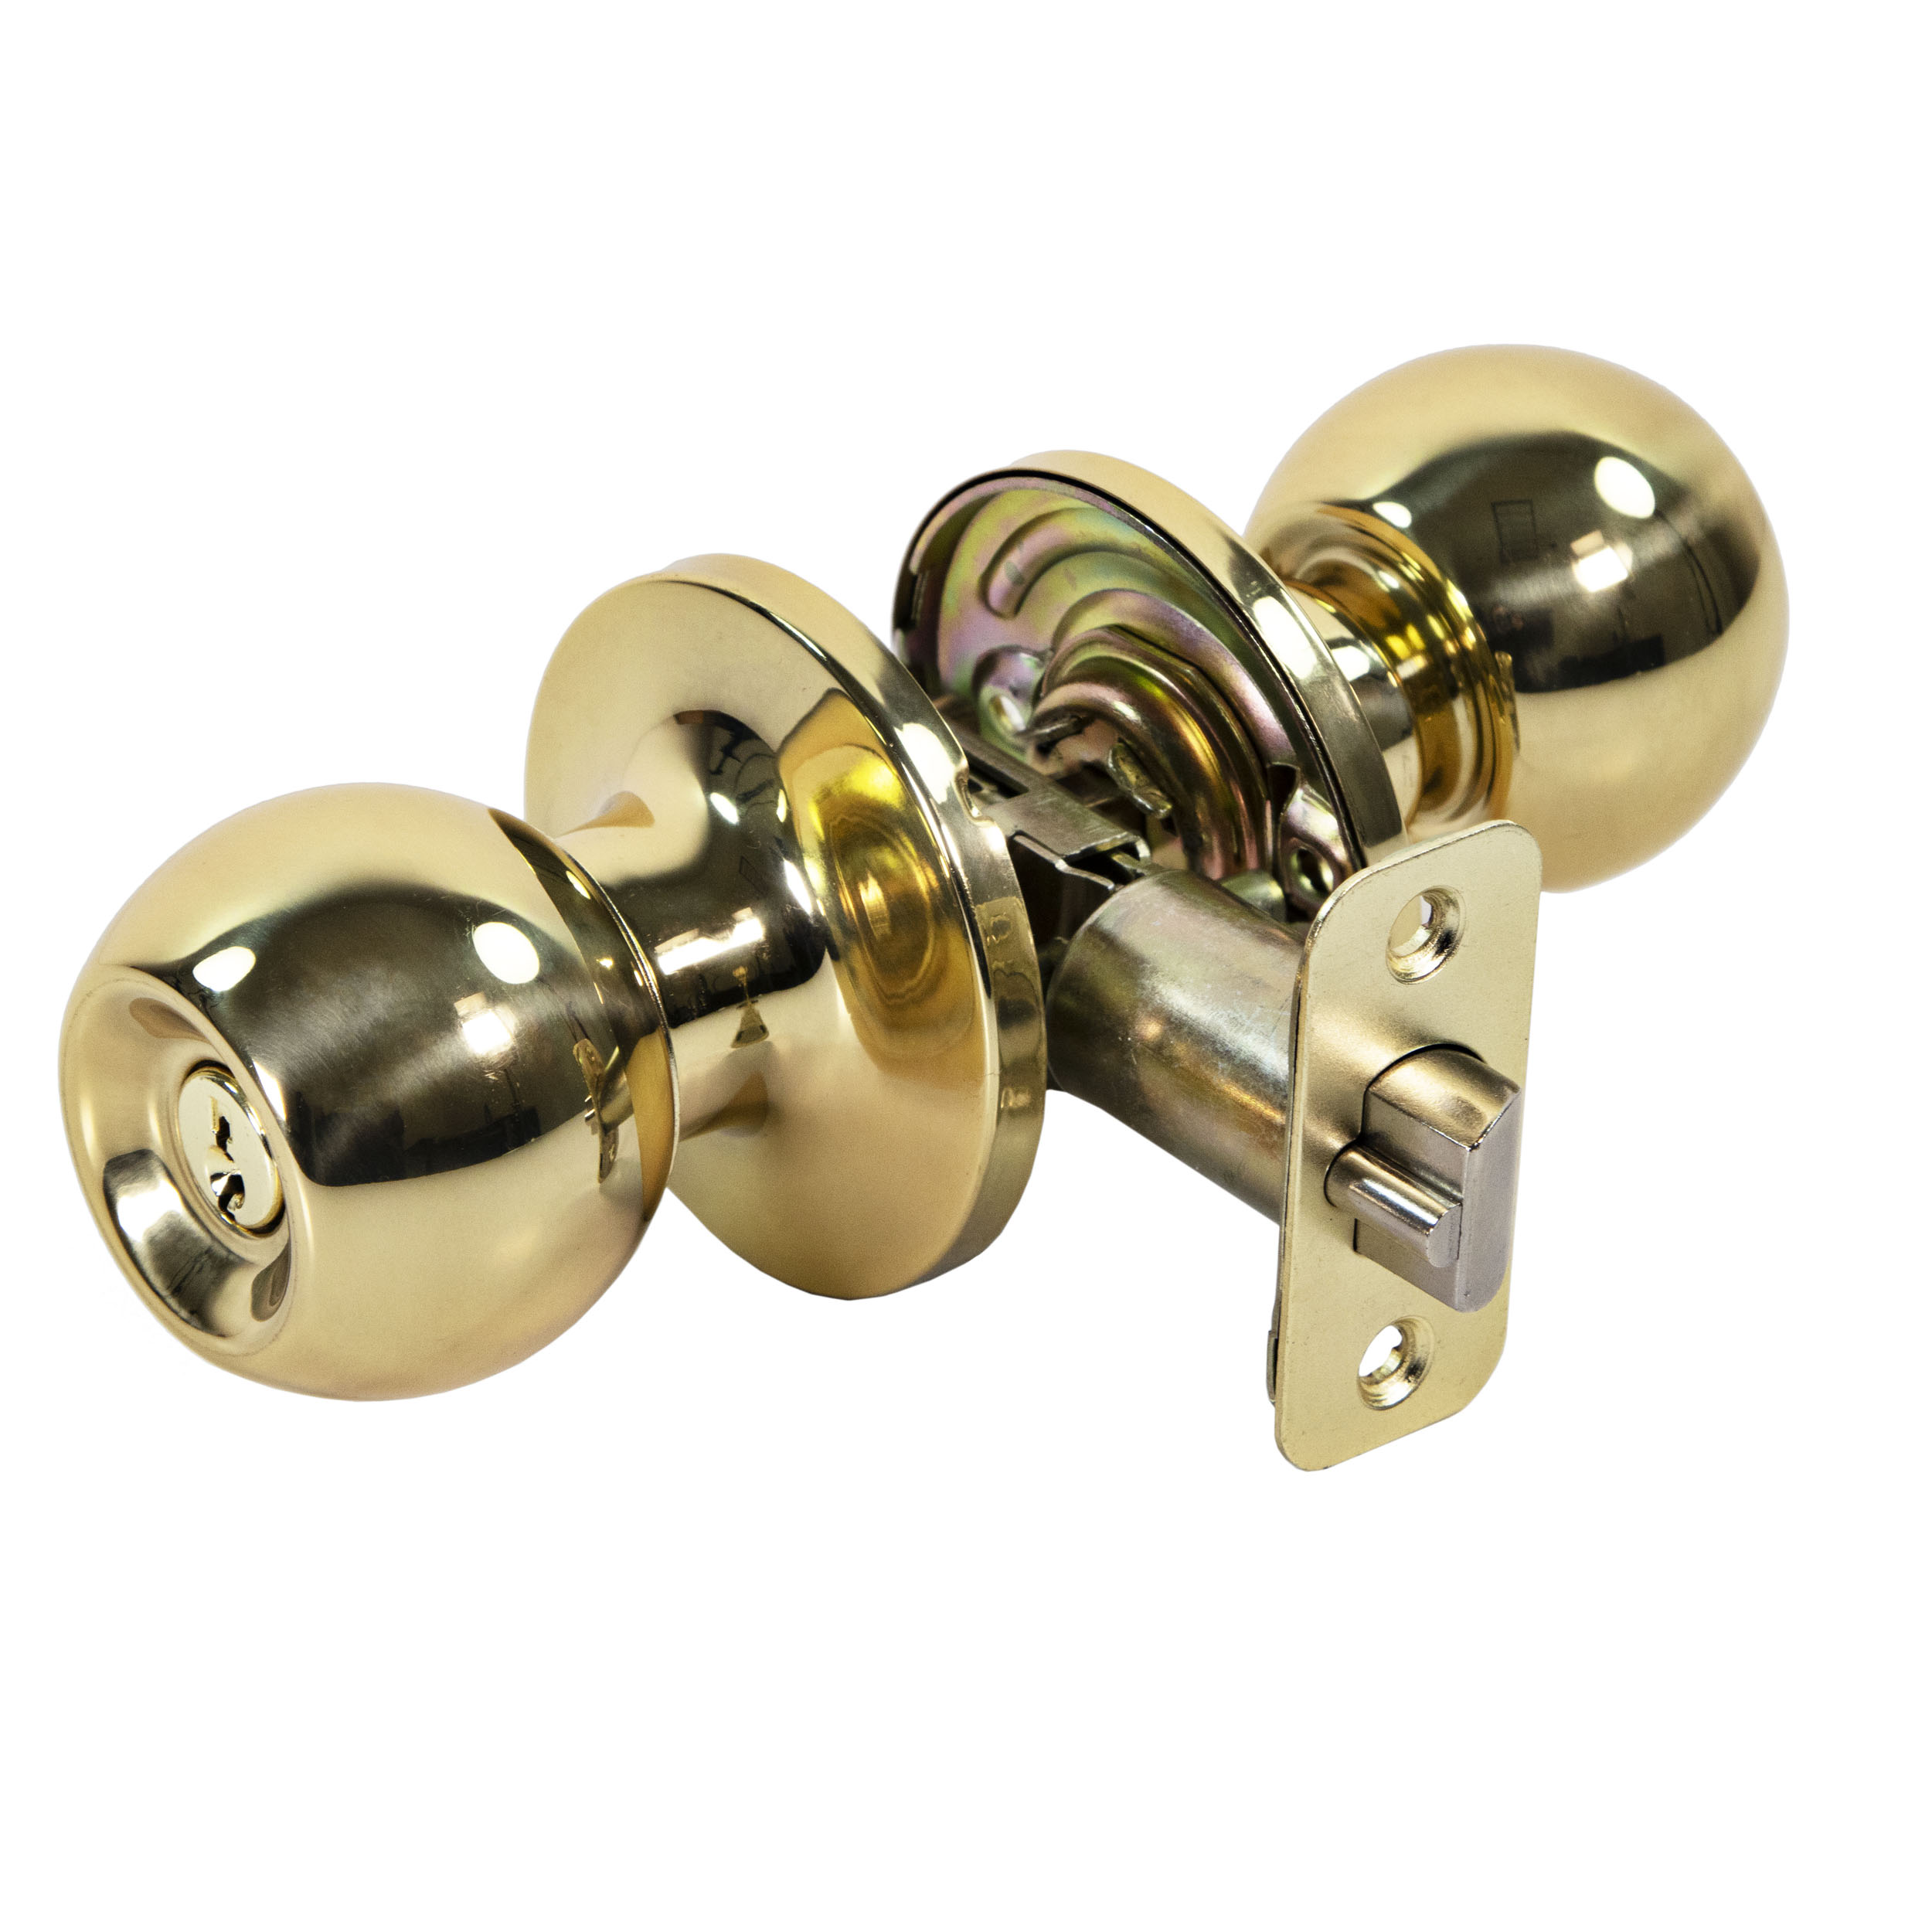 Ultra Security Chestnut Hill Keyed Entry Ball Door Knob - Security Keyed Entry Lockset, KW1 Keyed Entry, Fits 1-3/8" To 1-3/4" Thick Door (Polished Brass Finish, 1 Pack) - image 4 of 10